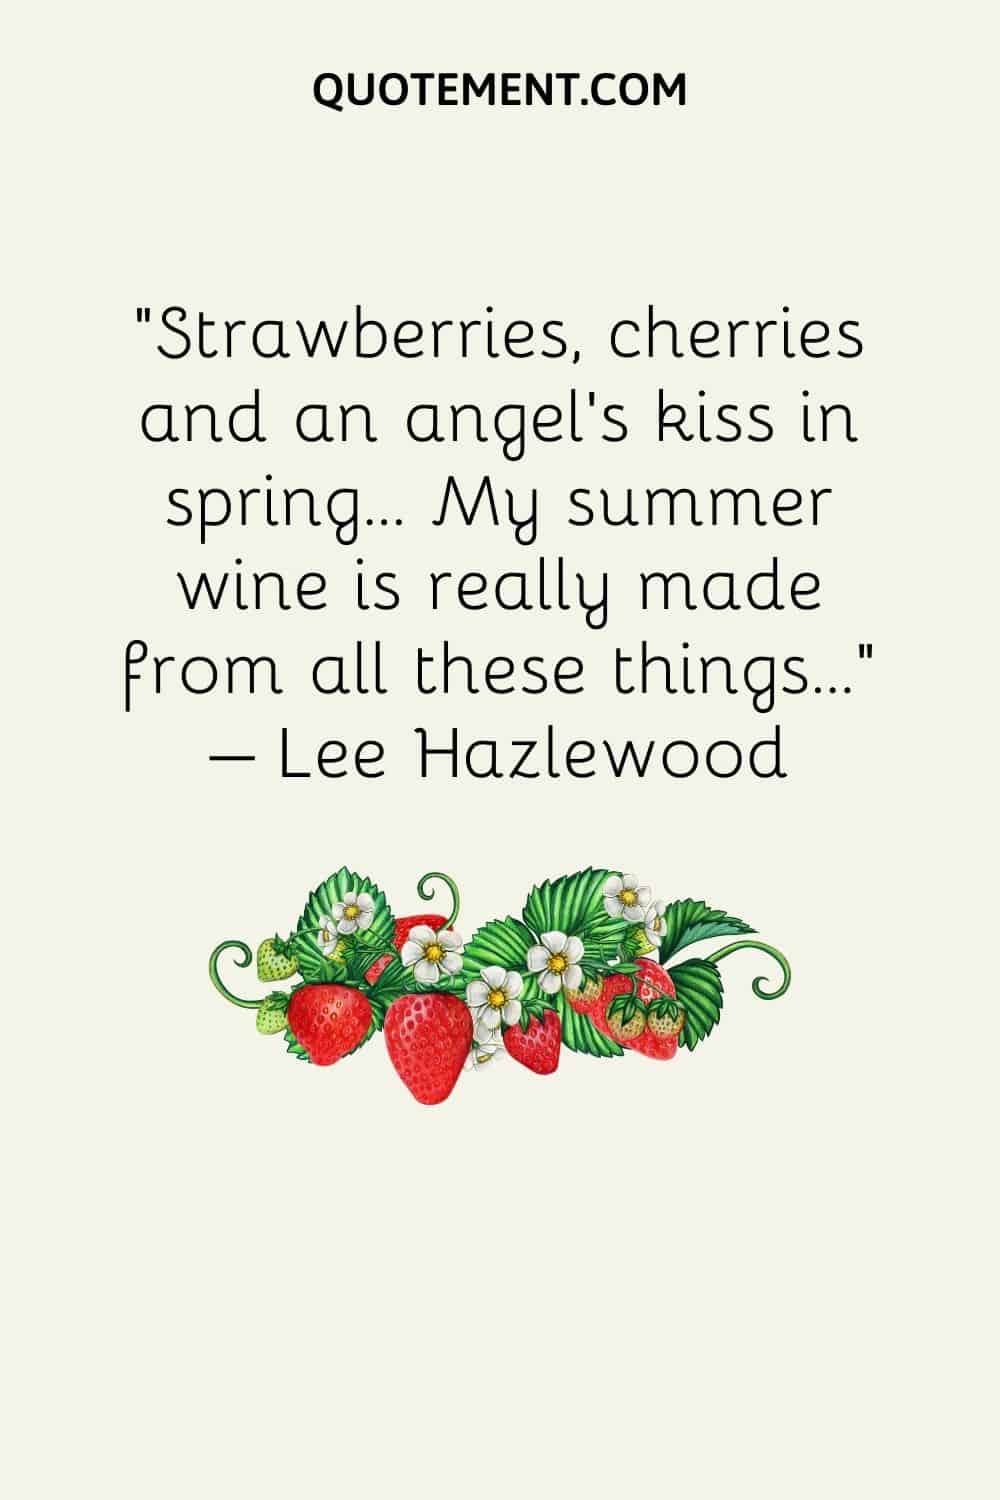 Strawberries, cherries and an angel's kiss in spring